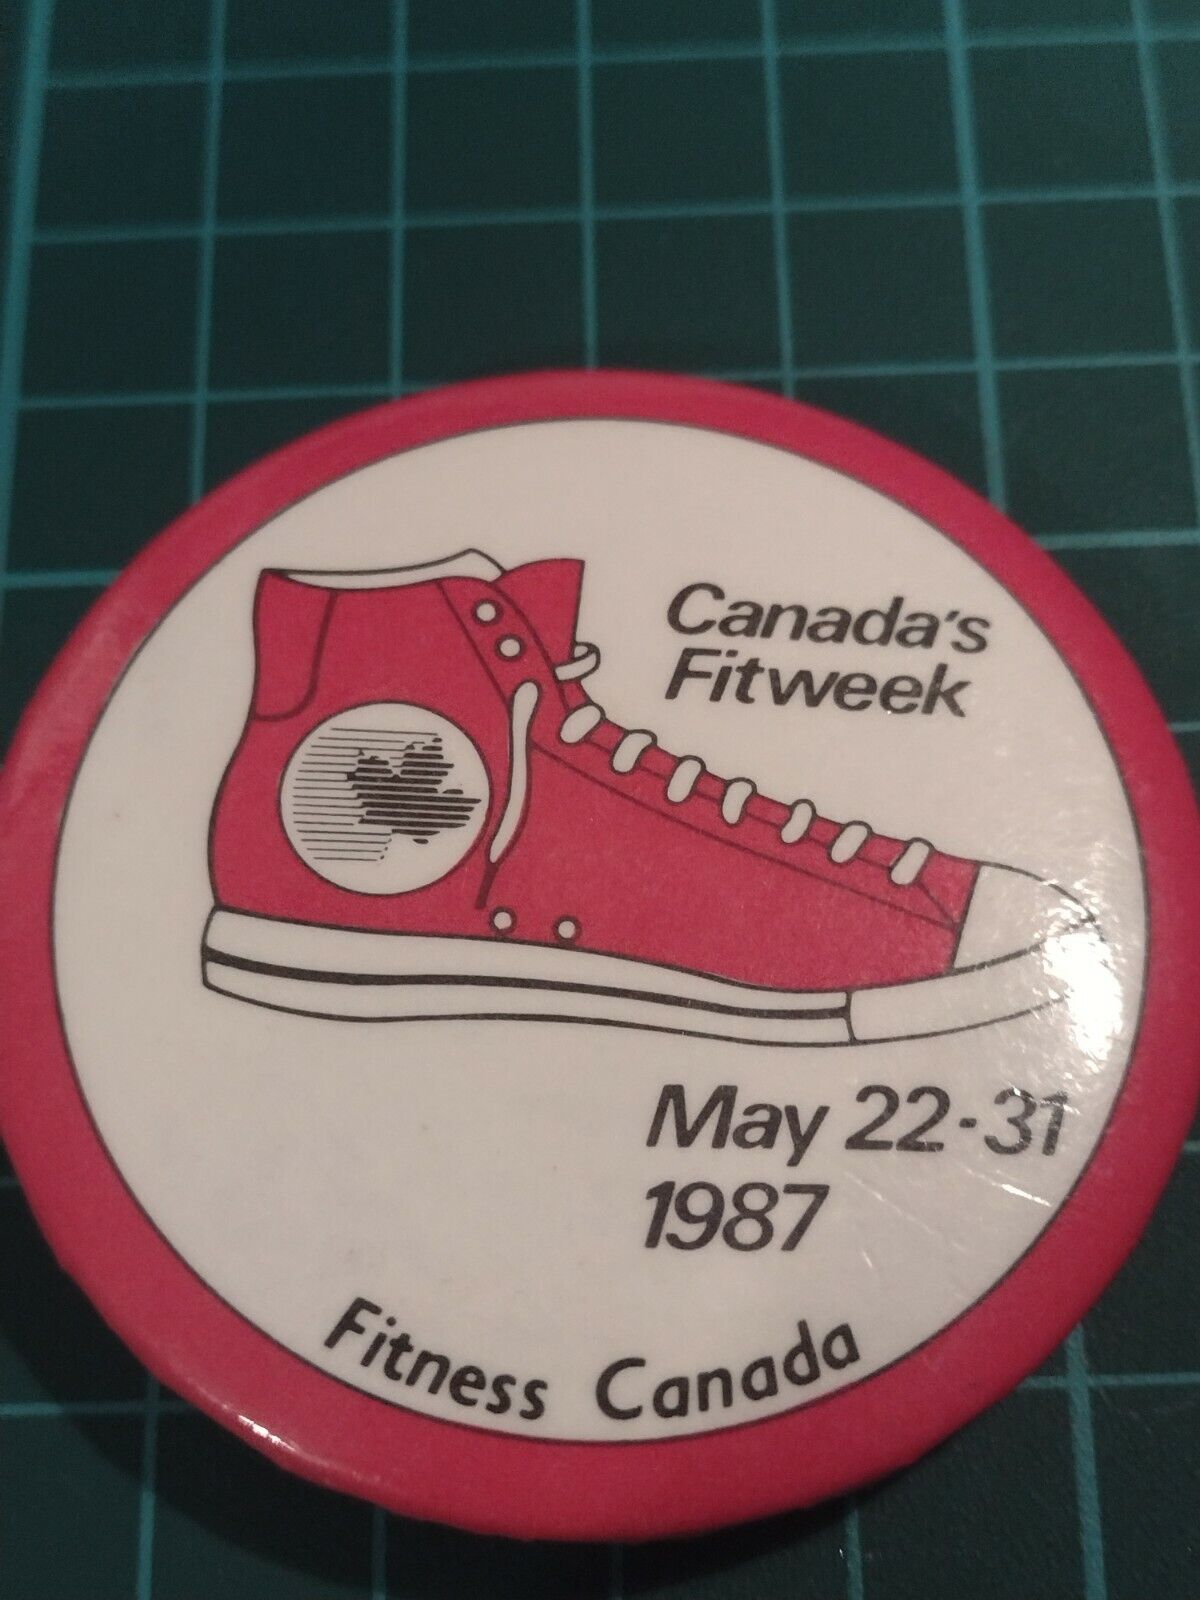 1987 fitness Canada Canada's Fitweek May 22-31 button badge pin pinback vintage 